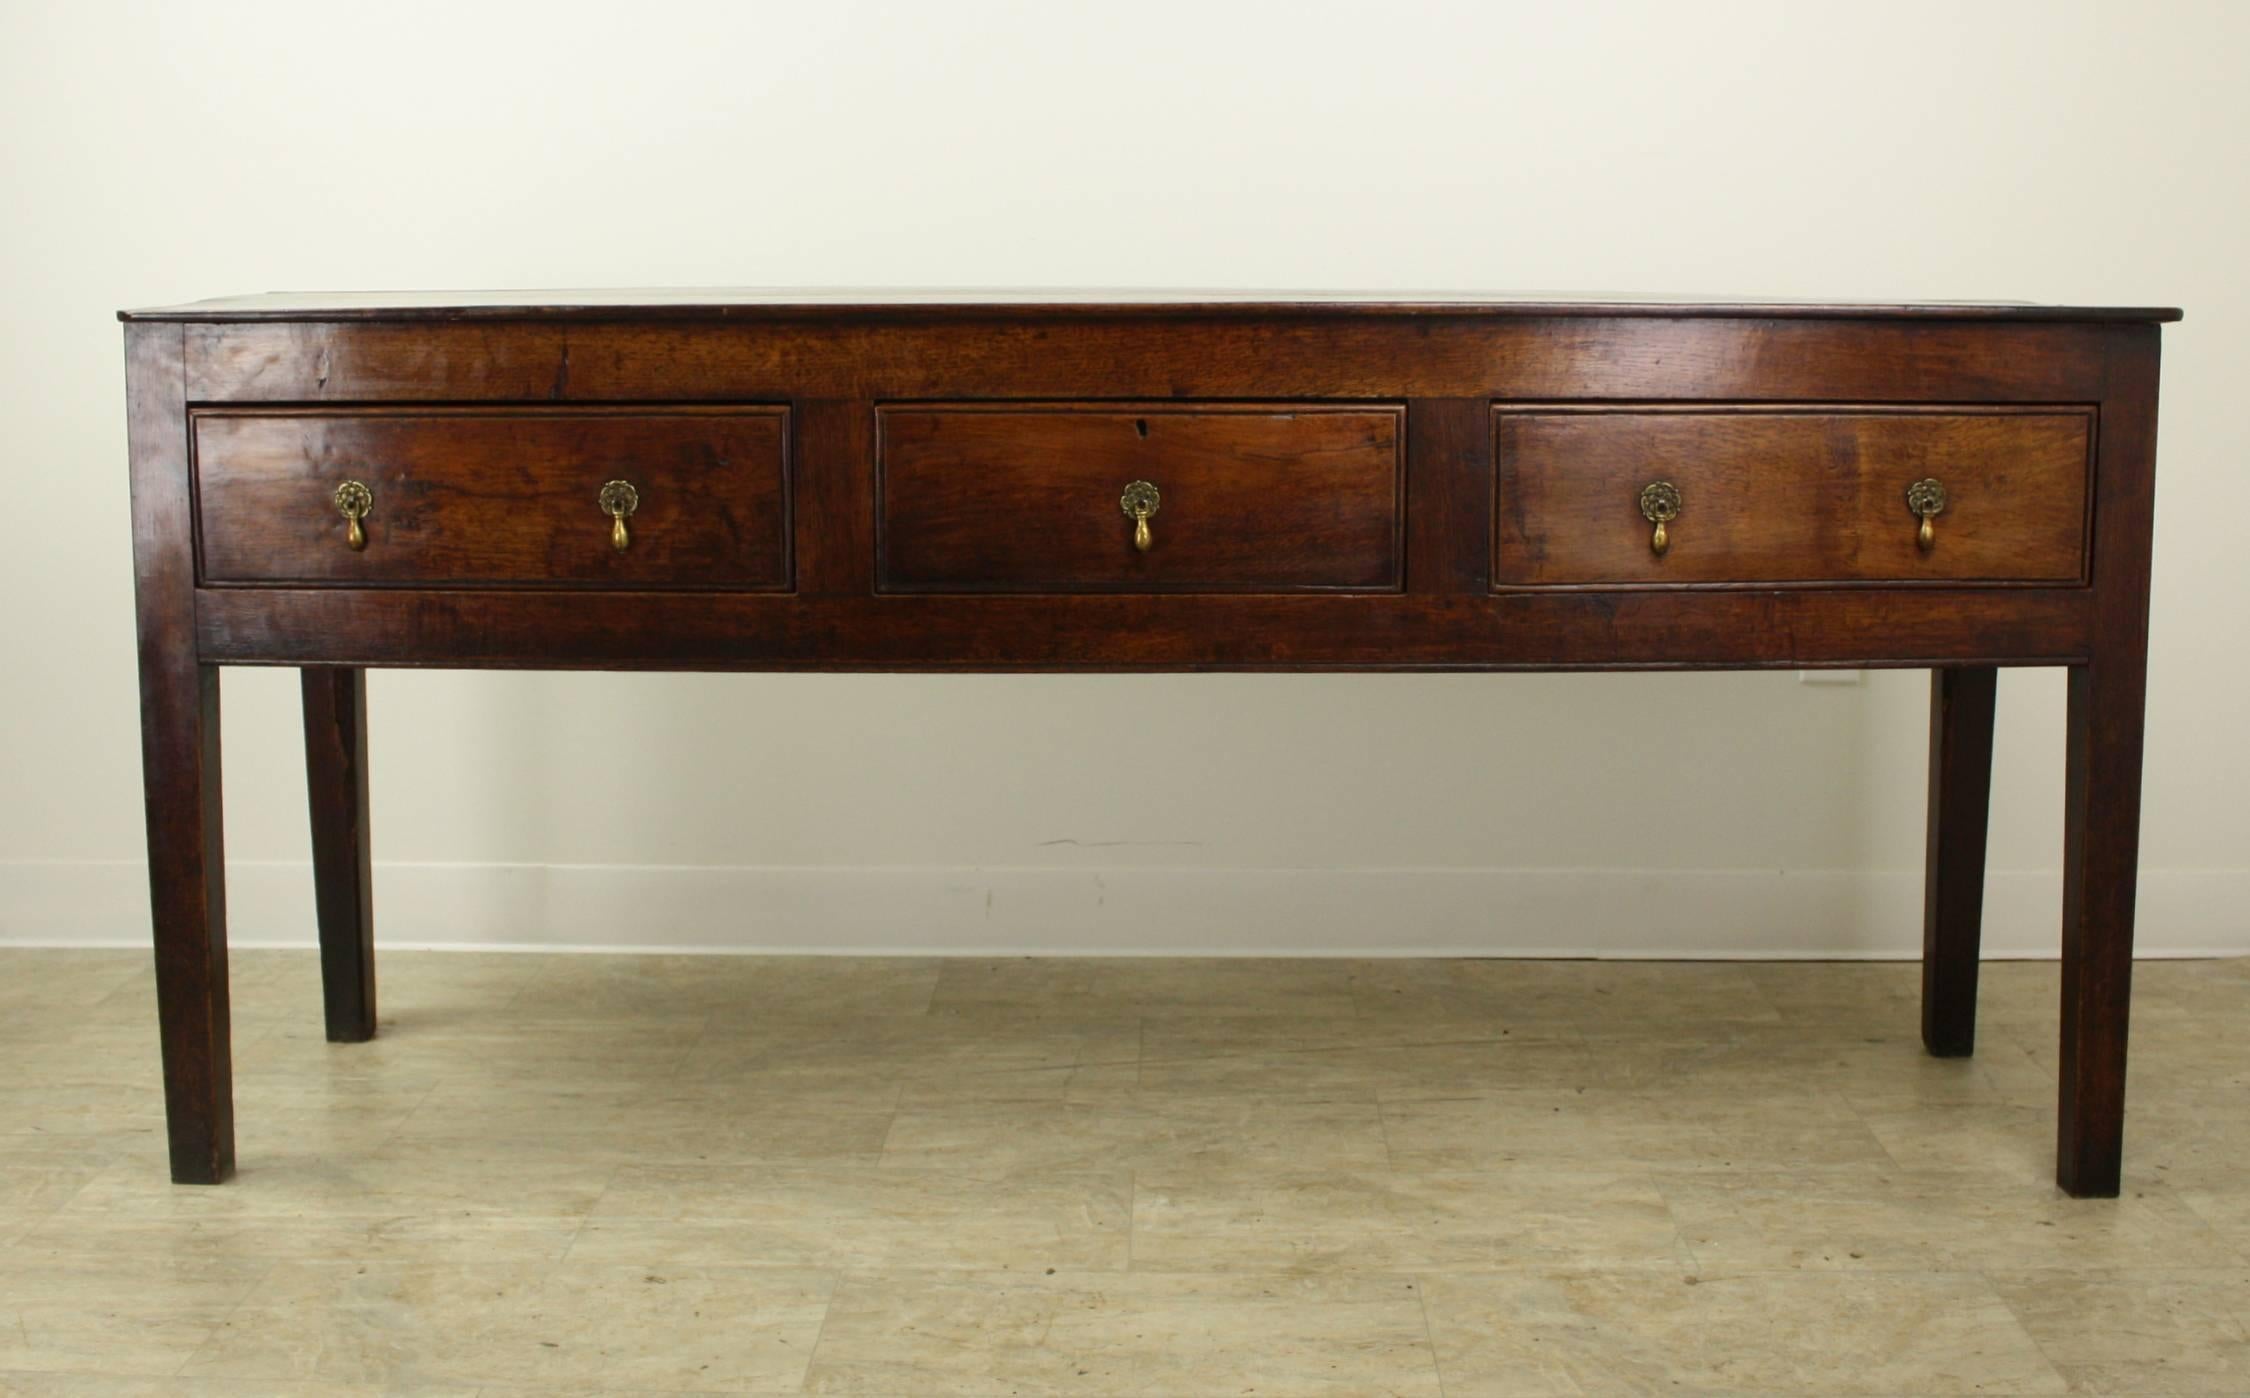 An early Welsh oak three-drawer console with a simple elegant Silhouette. The oak has a beautiful grain and color. The straight legs and brass teardrop handles complete the look of this sideboard. Would make an arresting hall table or sofa table.